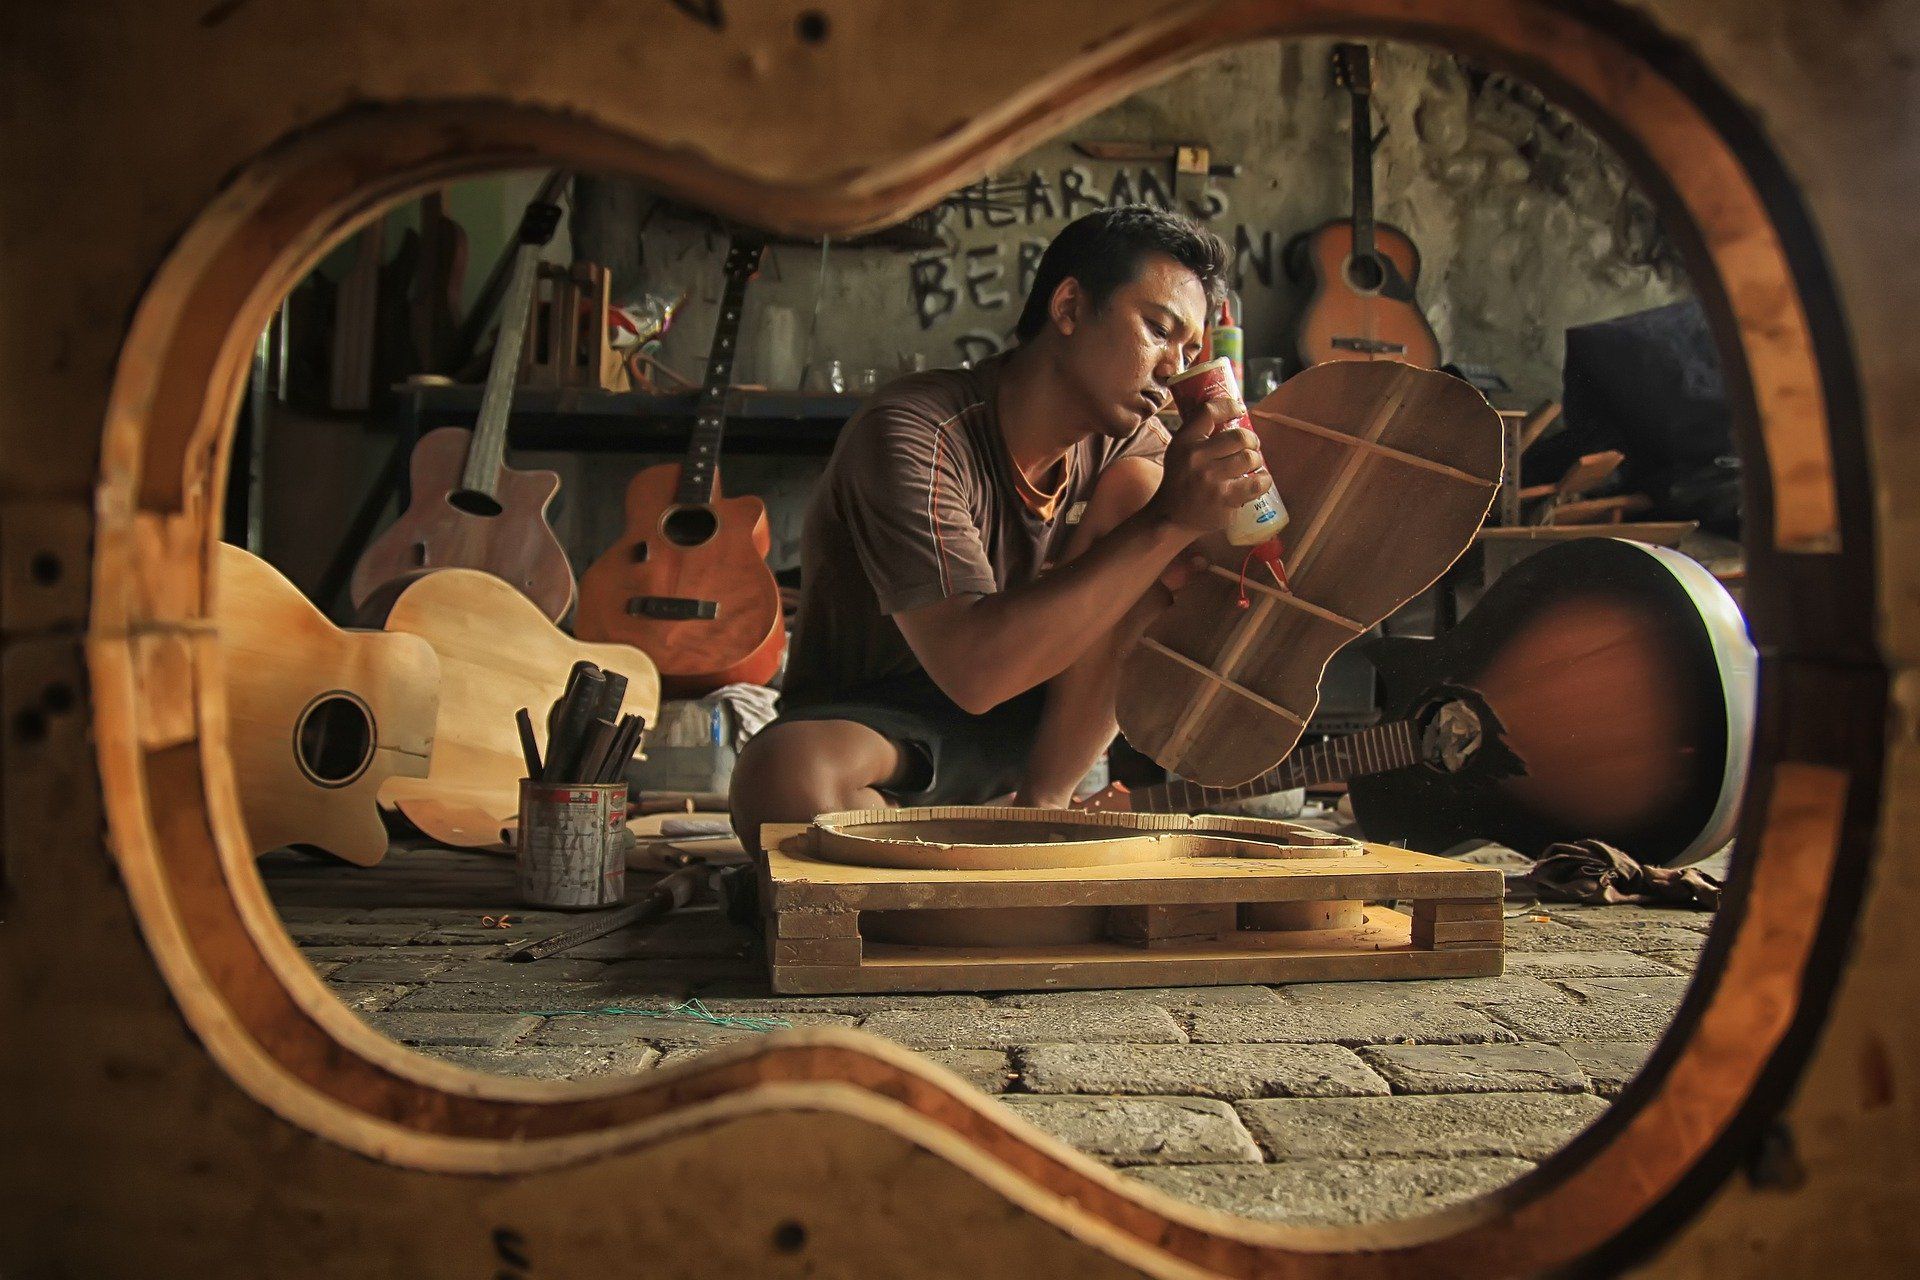 Man putting a guitar together in a workshop